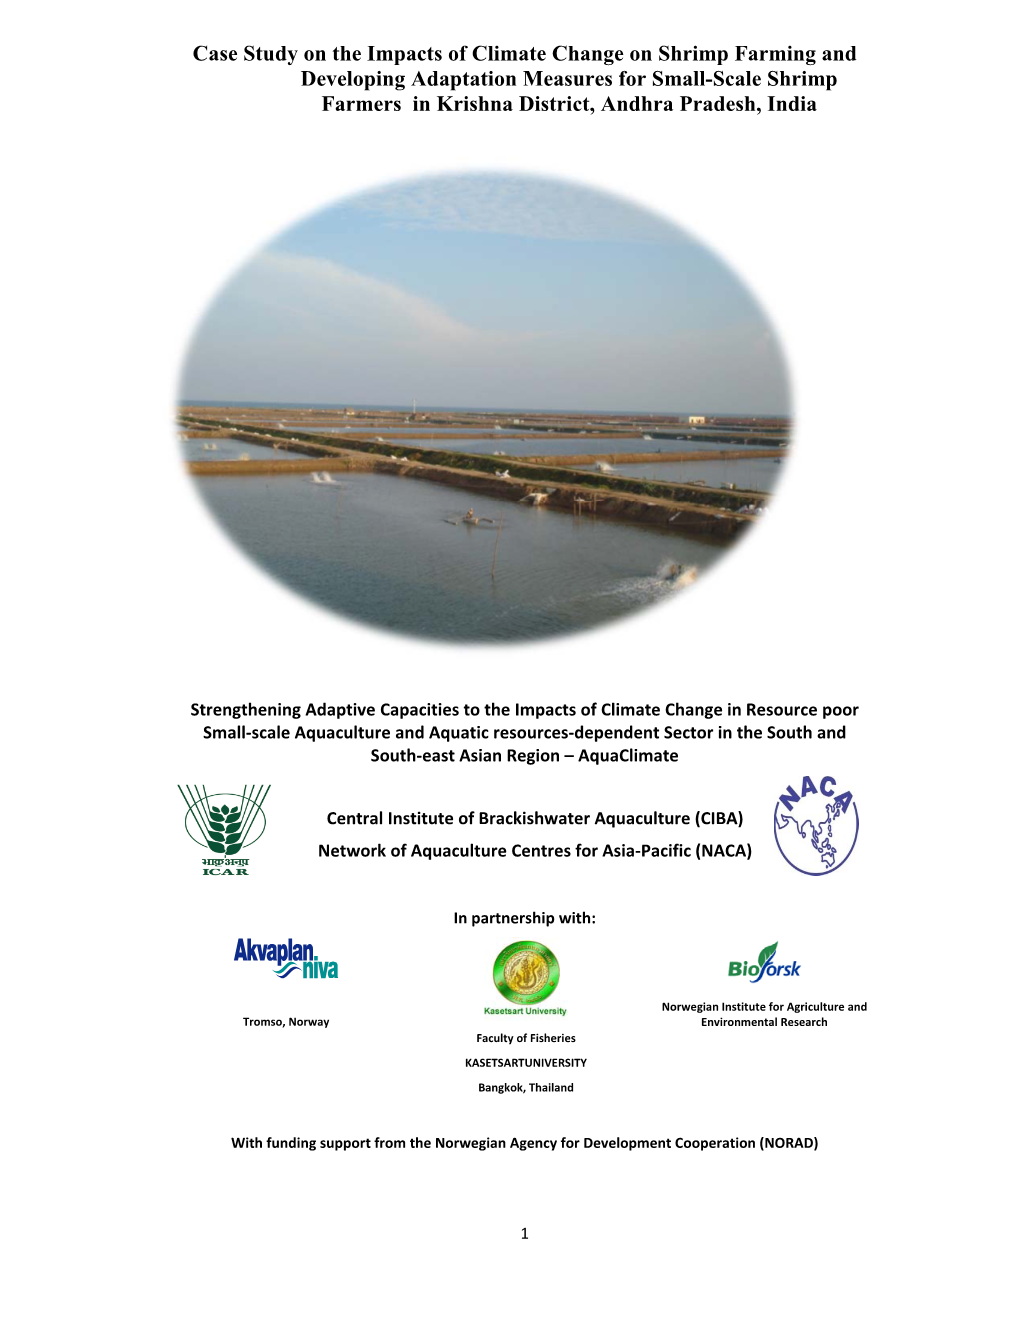 Case Study on the Impacts of Climate Change on Shrimp Farming And